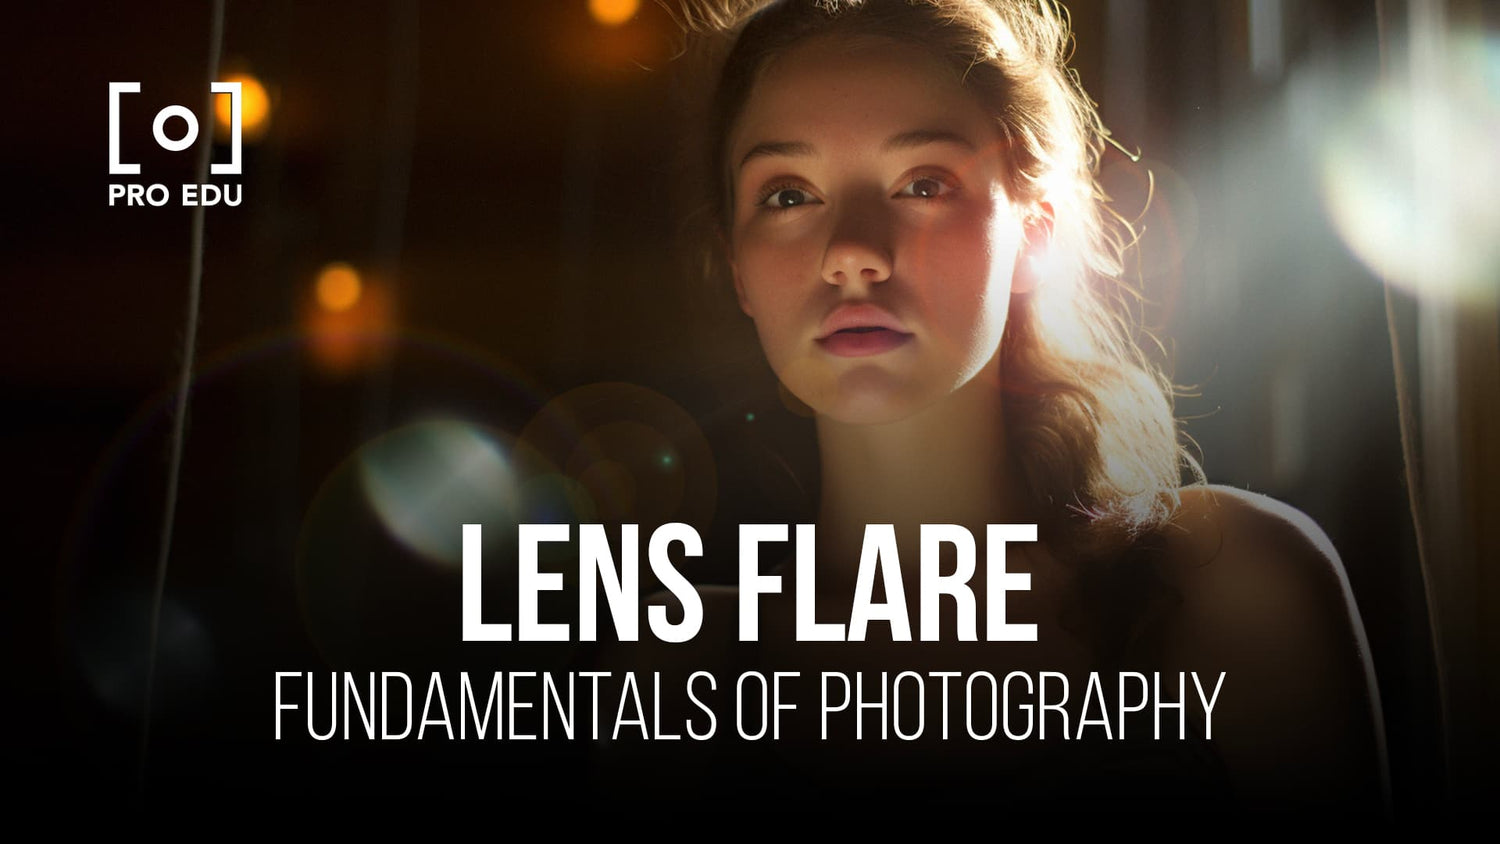 Harnessing light for artistic effect with lens flare techniques in photography